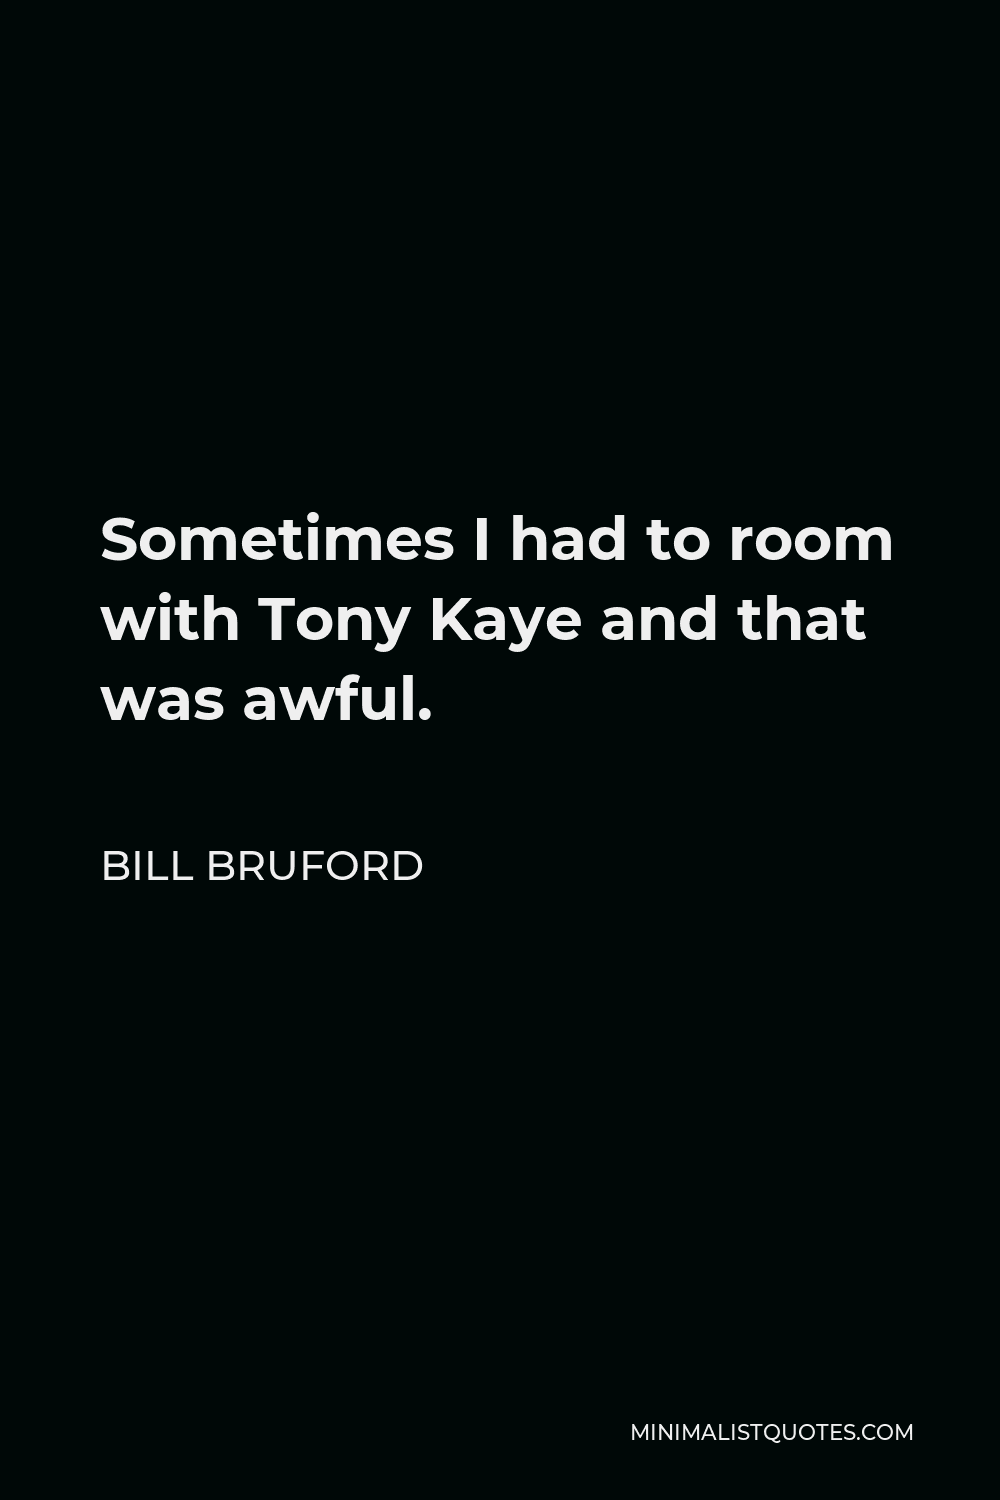 Bill Bruford Quote - Sometimes I had to room with Tony Kaye and that was awful.